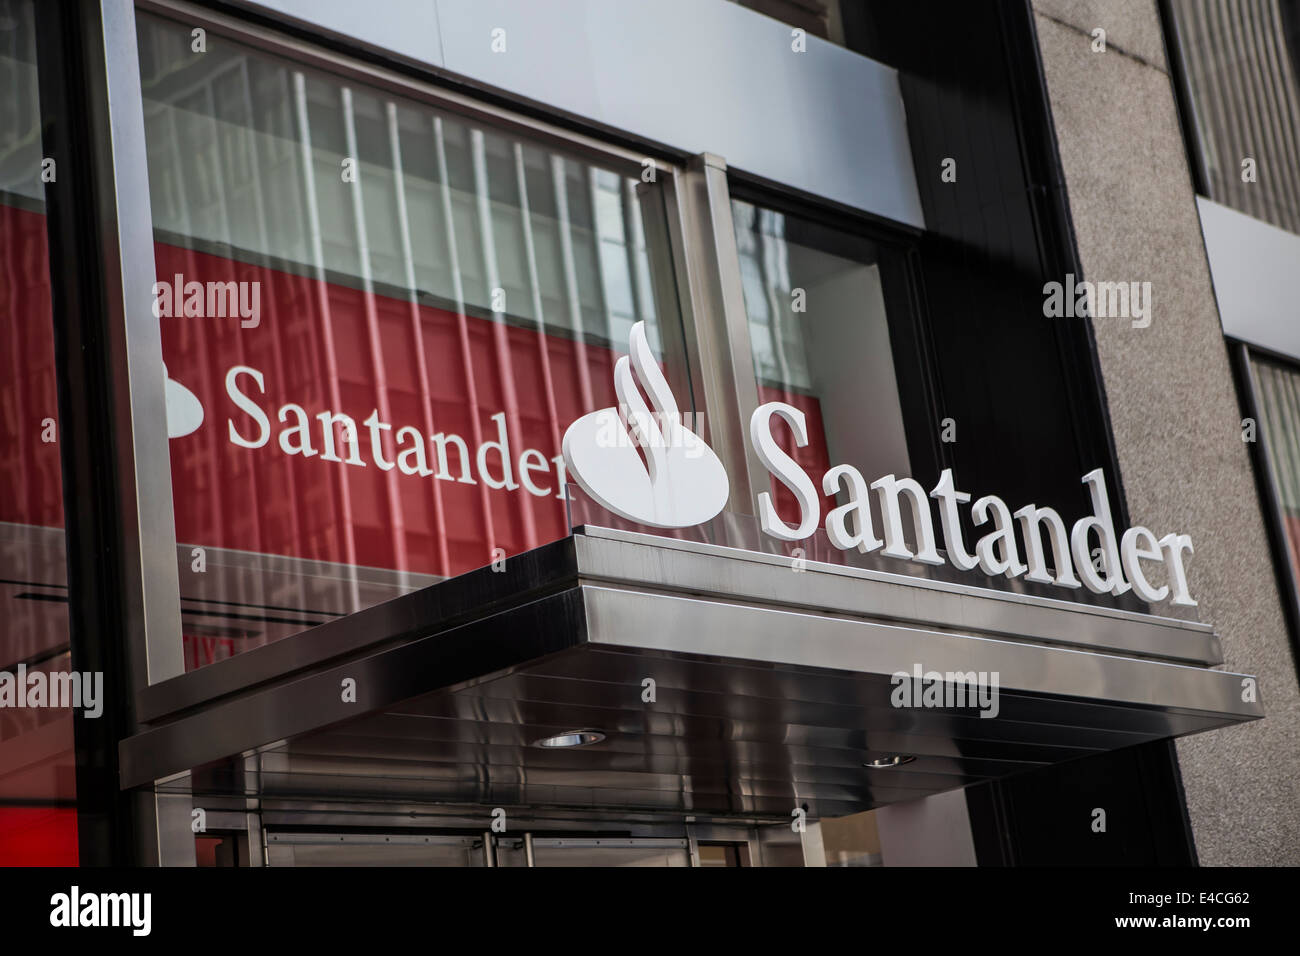 A Santander Bank branch is pictured in the New York City borough of Manhattan, NY Stock Photo